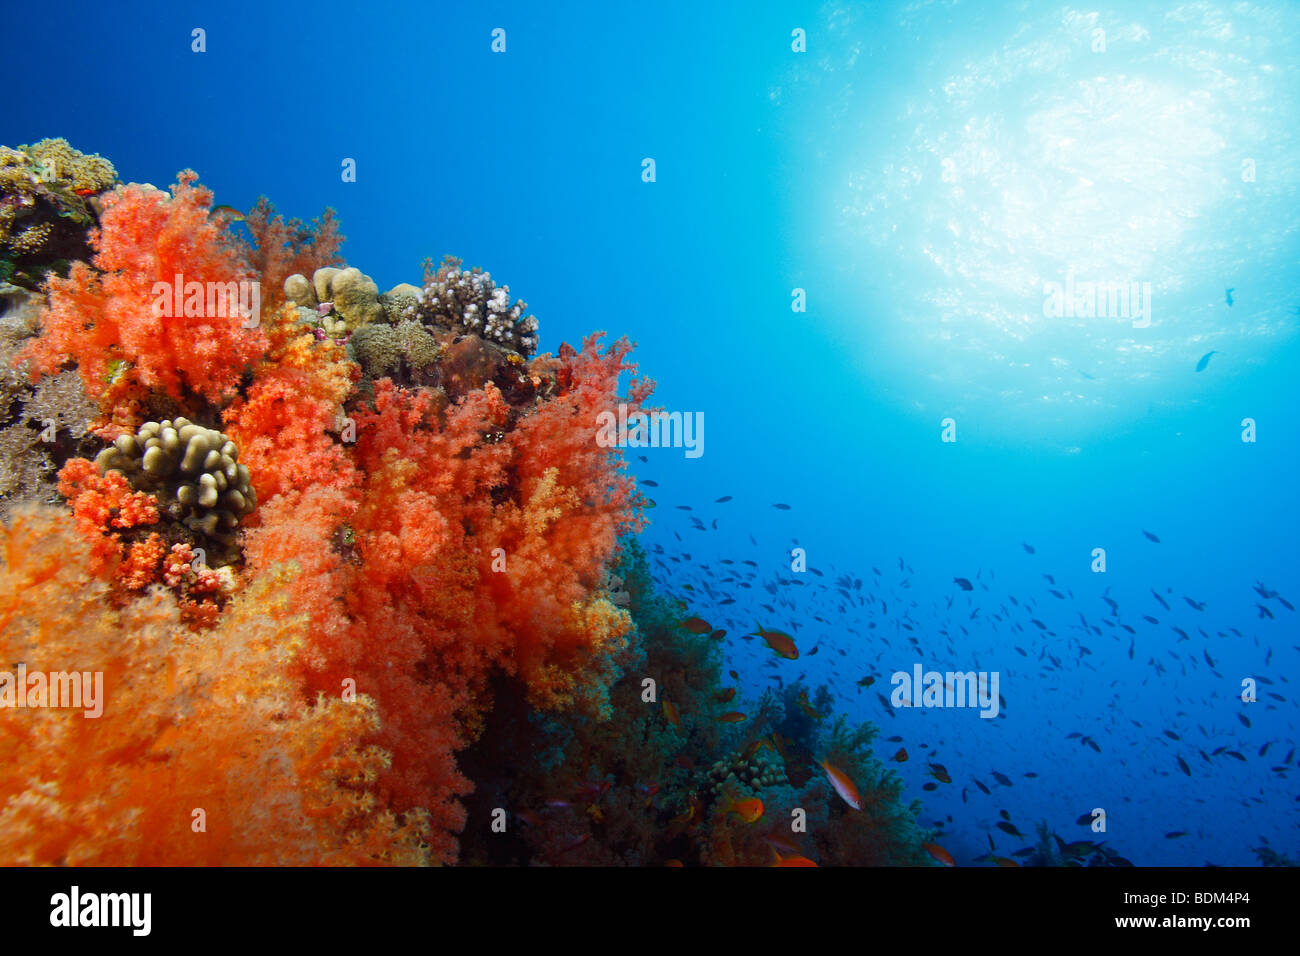 Brightly colored soft coral formation with clear blue water and sun in the background. Stock Photo